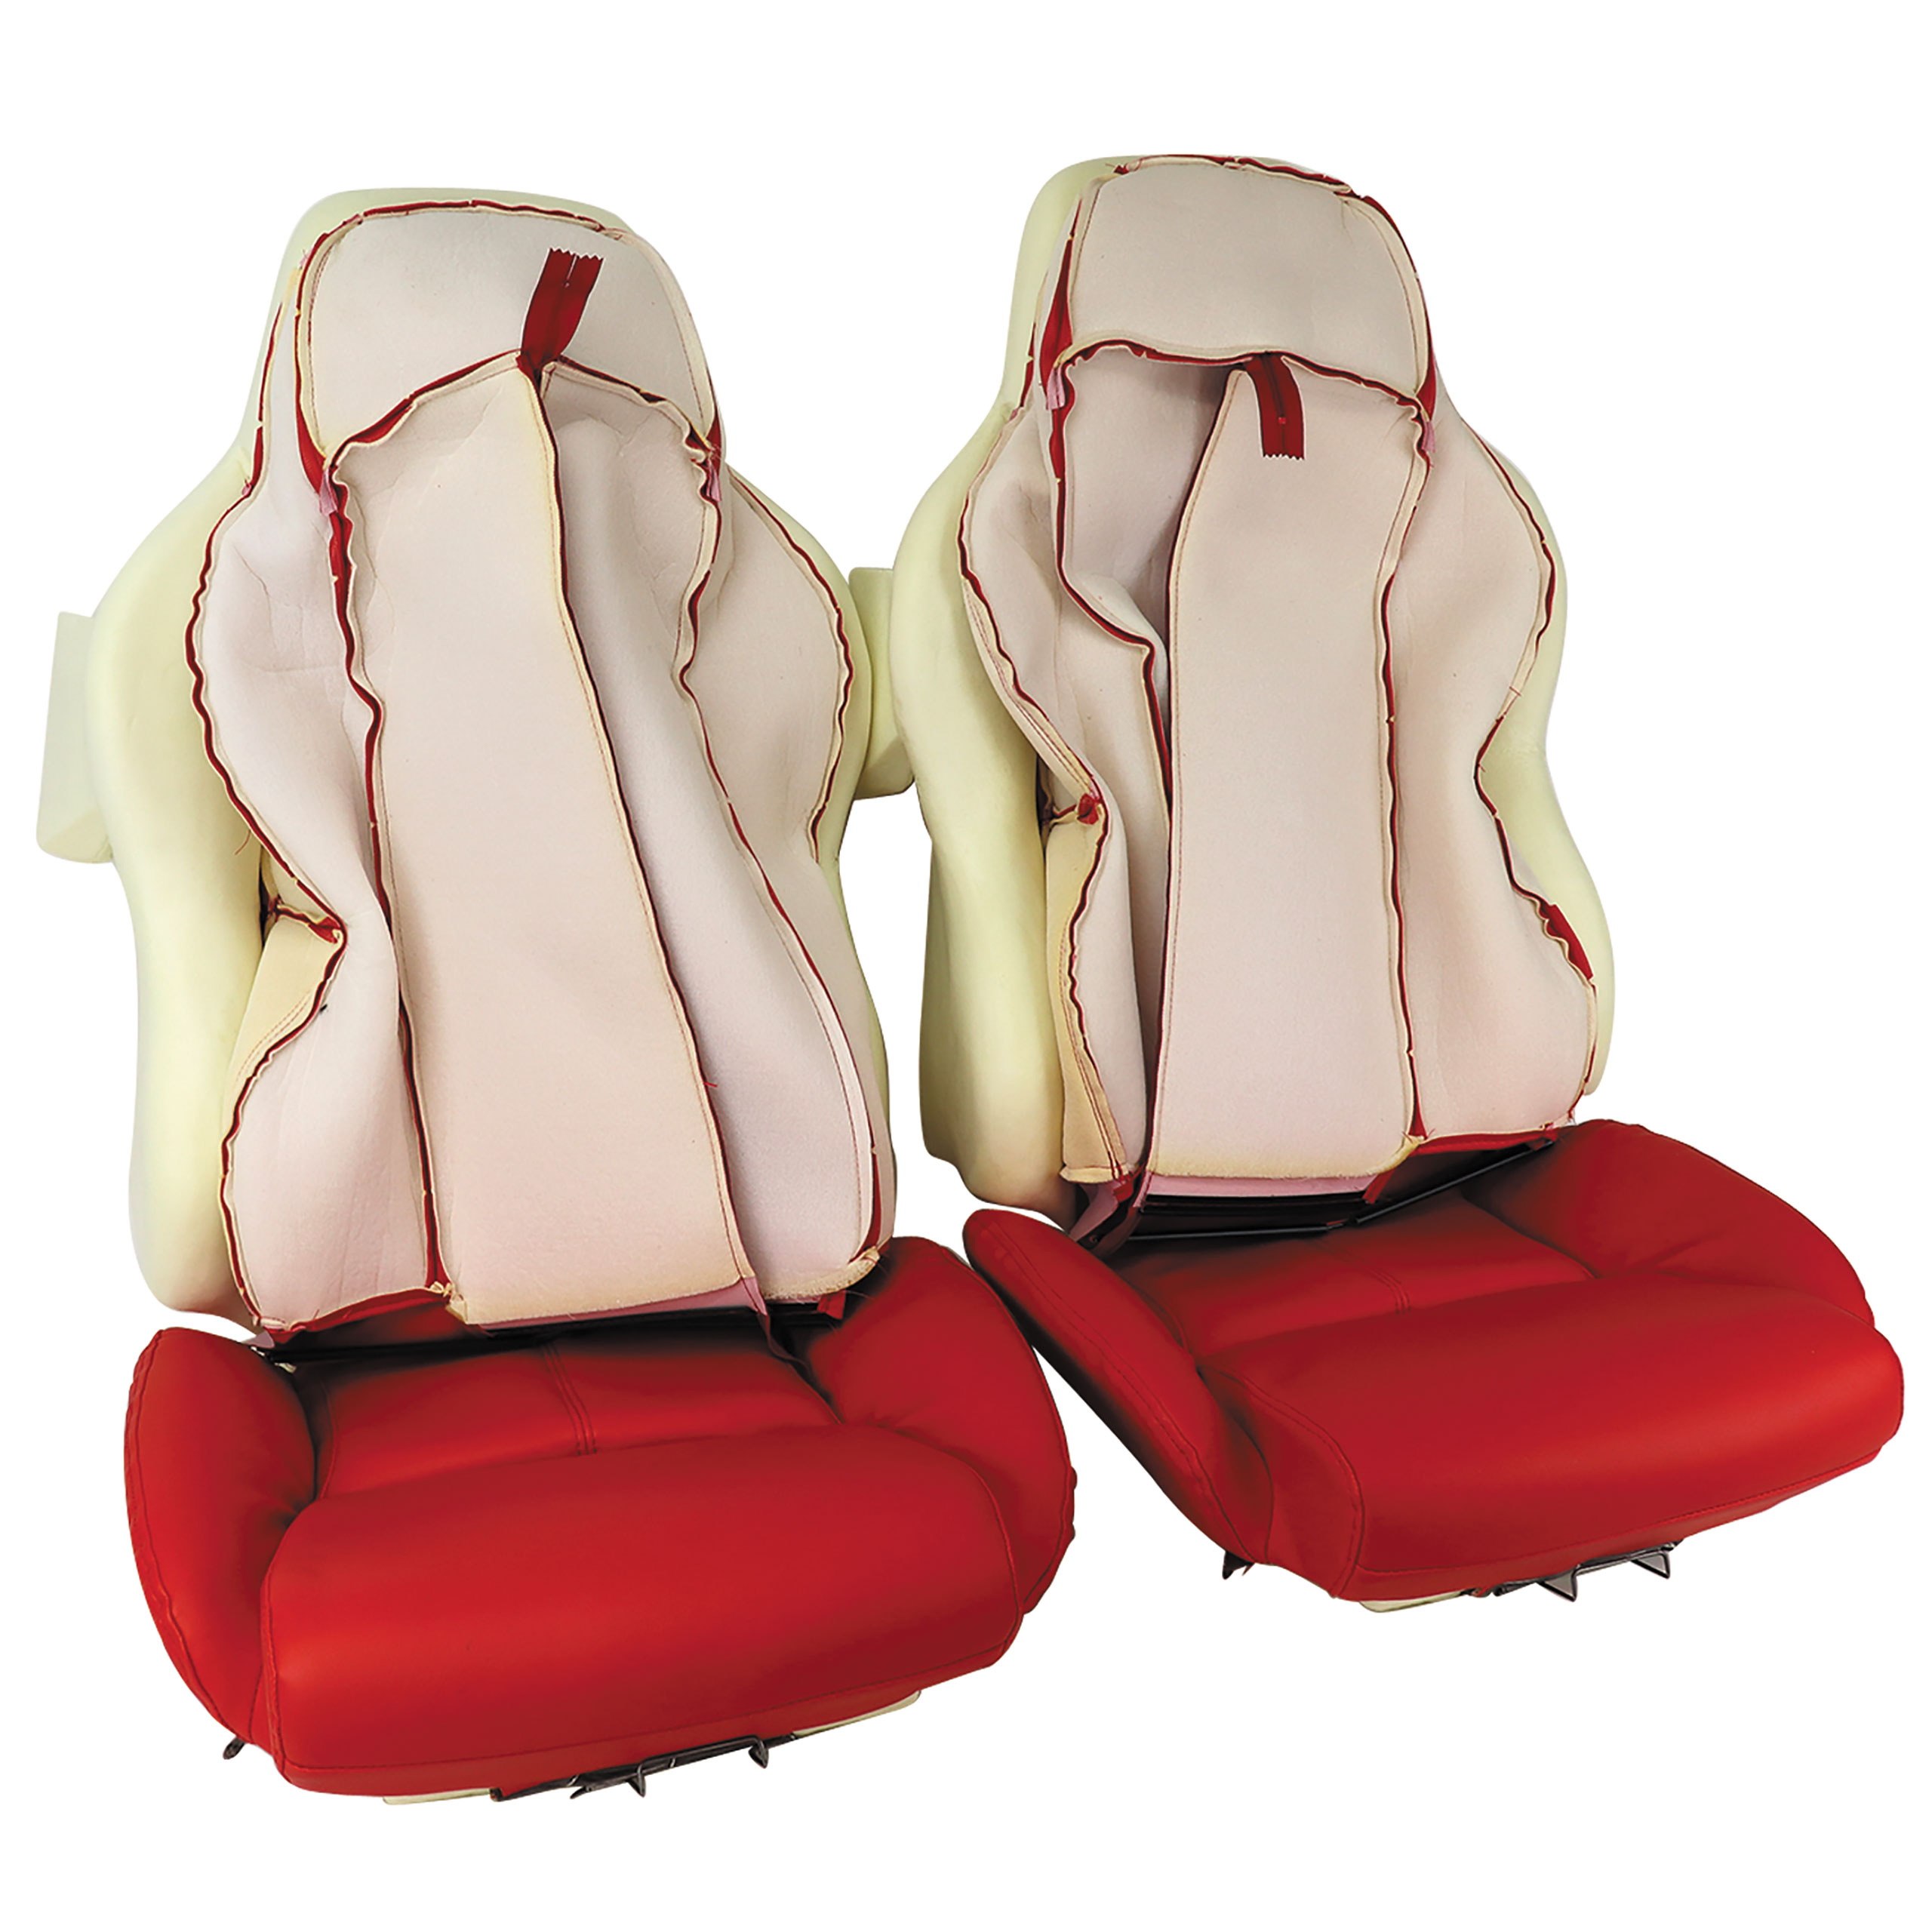 1994-1996 C4 Corvette Mounted "Leather-Like" Vinyl Seat Covers Red Standard